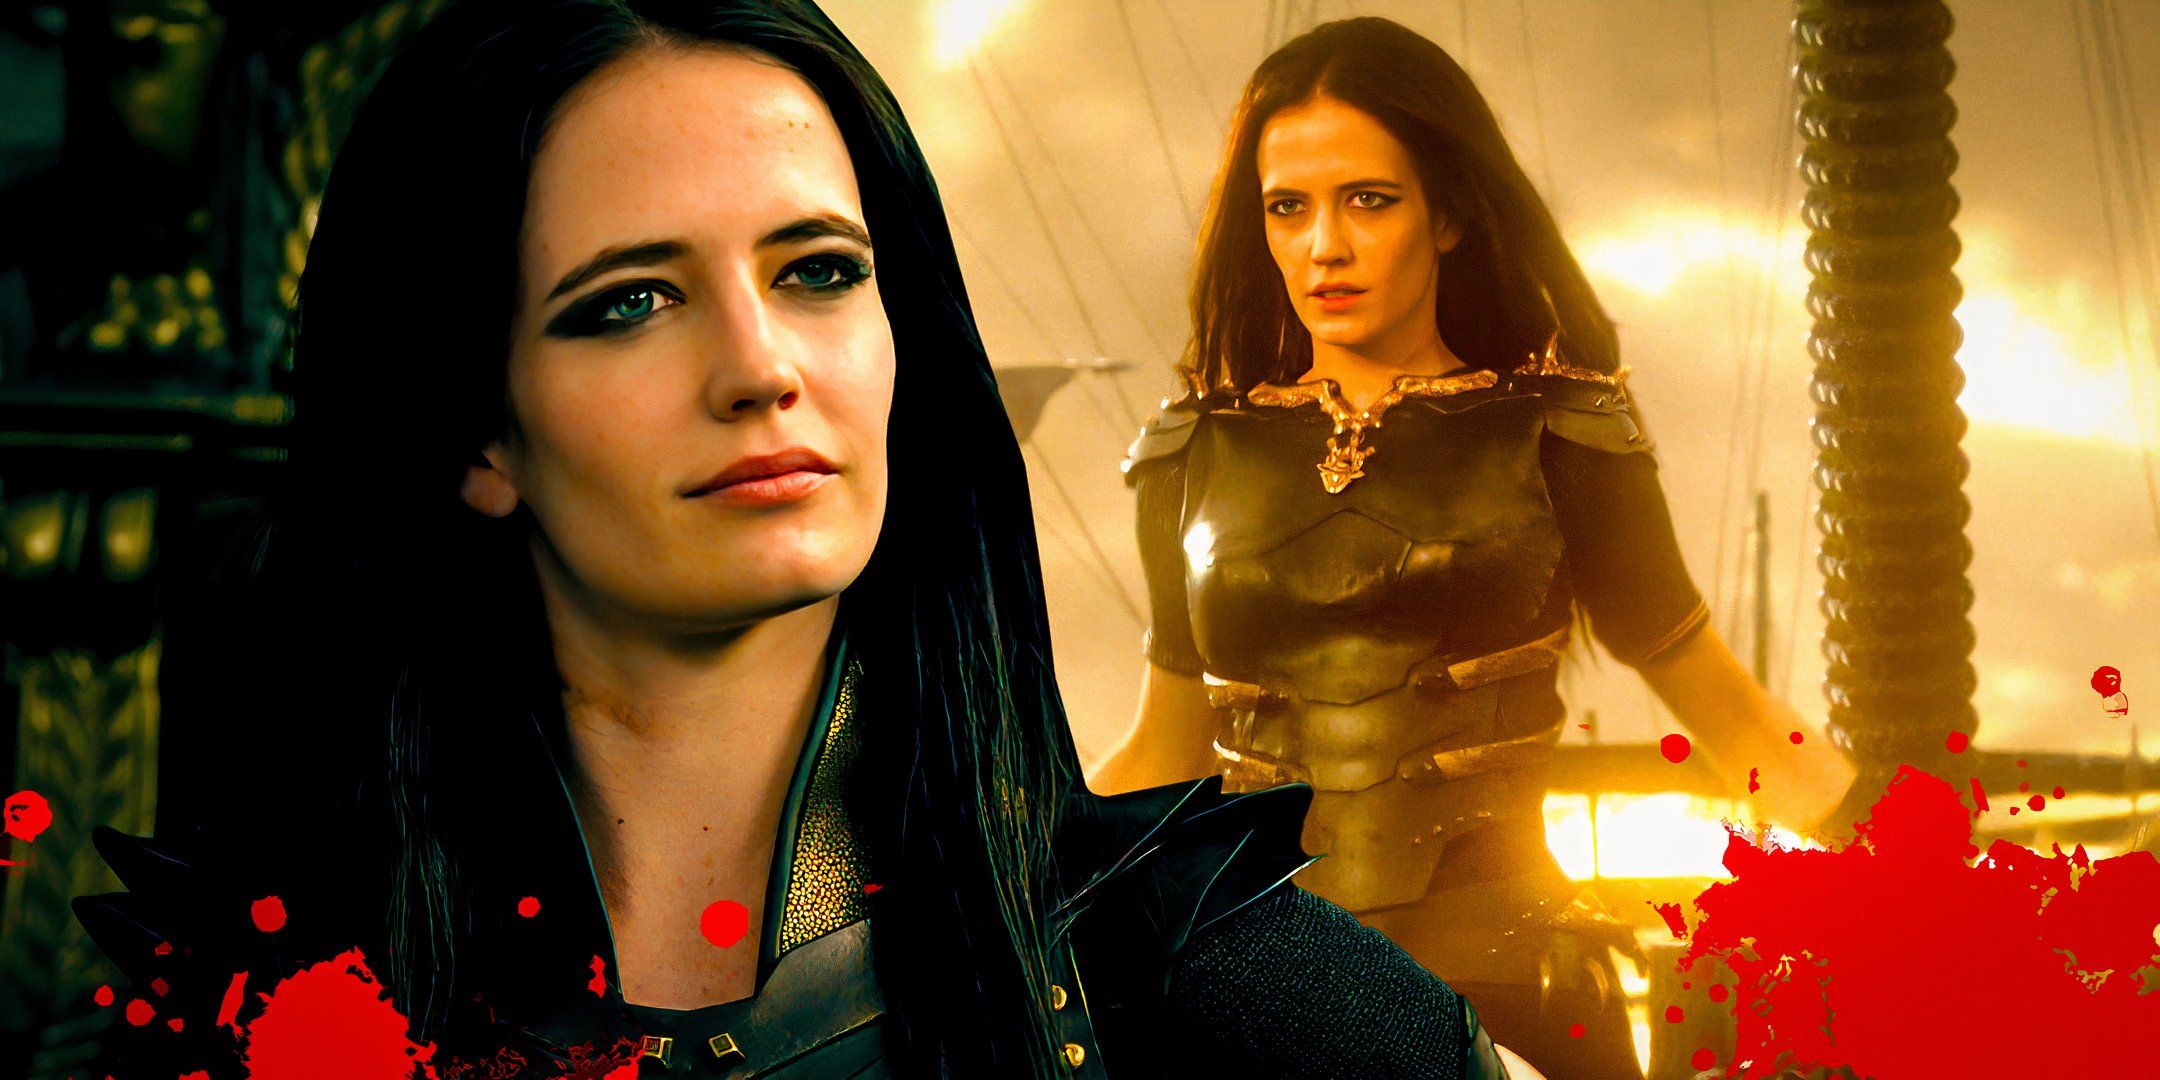 Eva Green as Artemisia looking serious in 300: Rise of an Empire